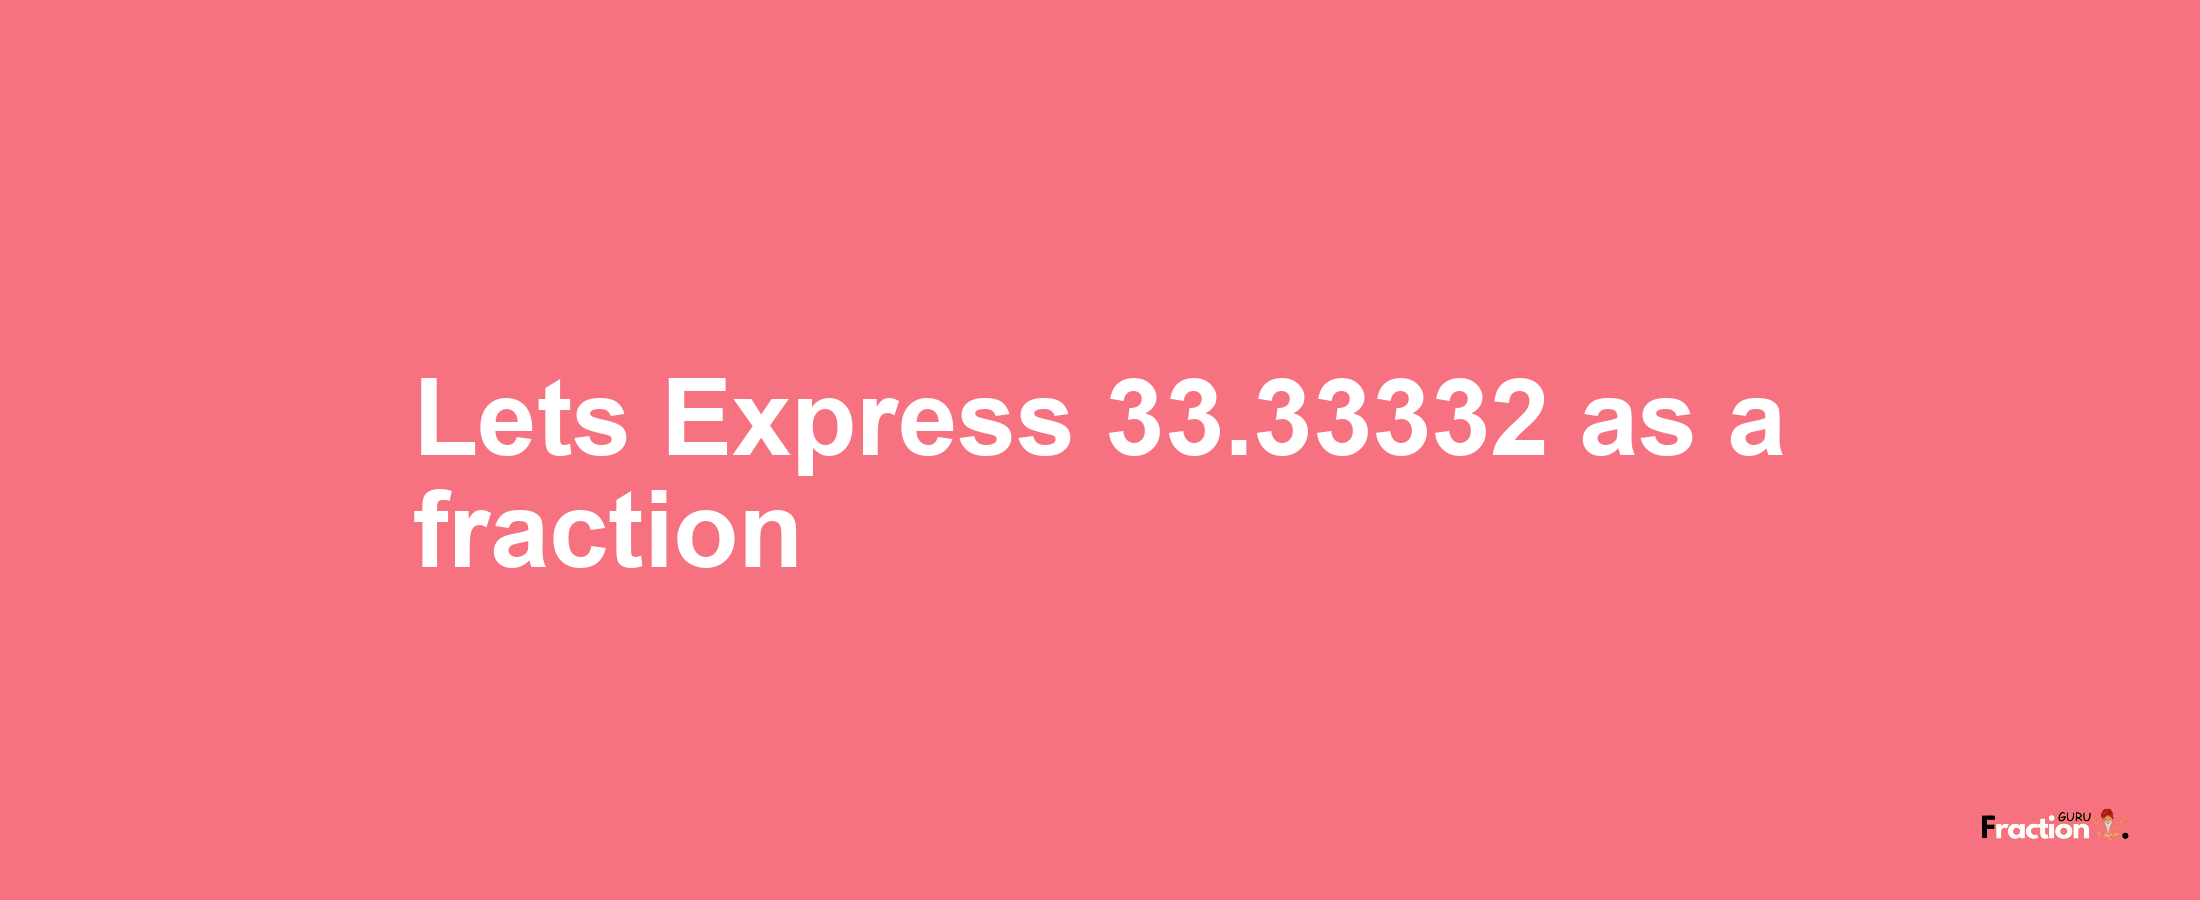 Lets Express 33.33332 as afraction